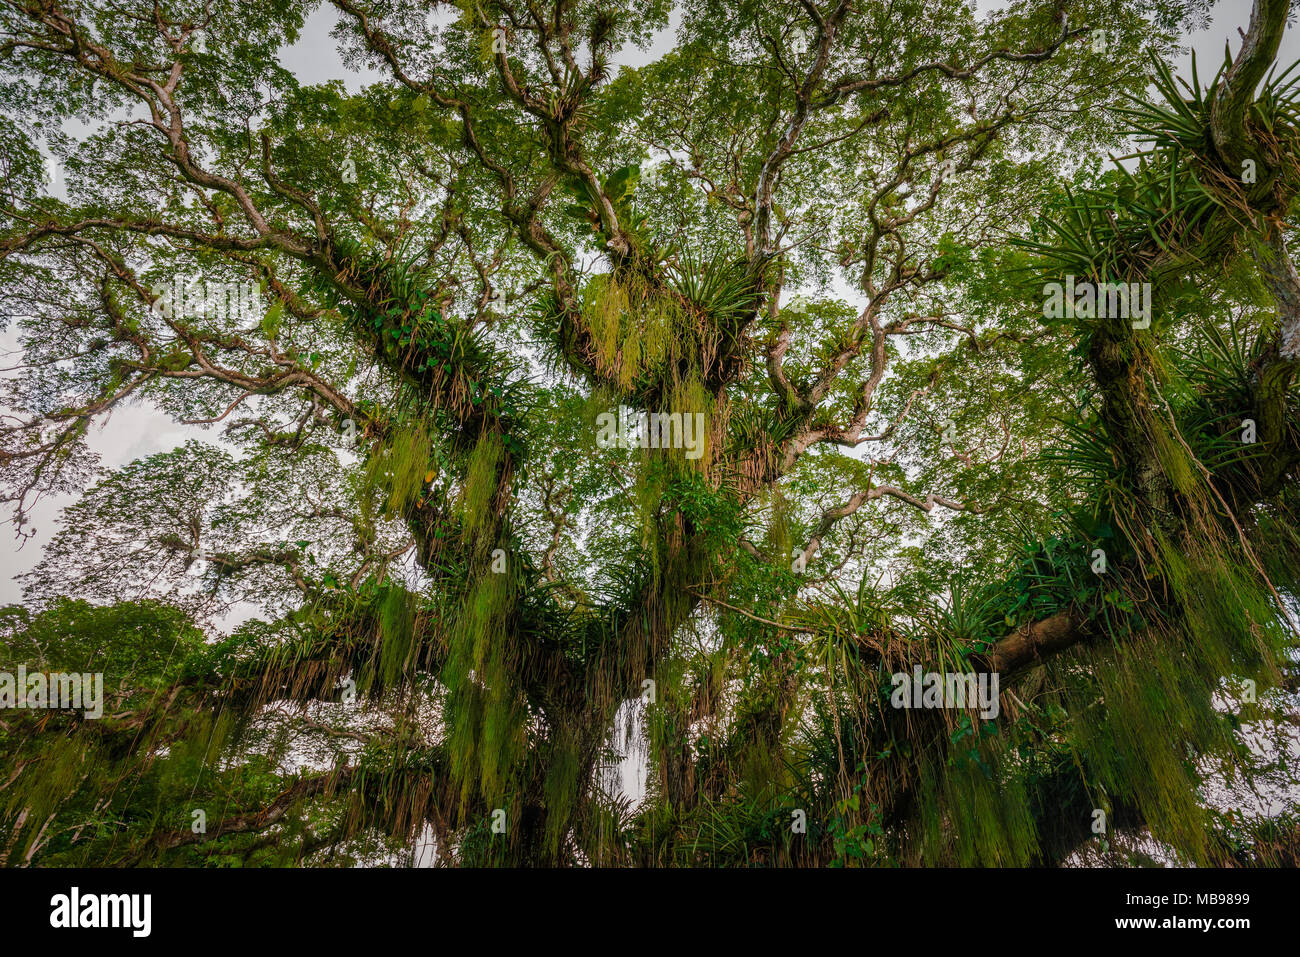 Huge broad tropical forest tree viewed from below Caribbean Trinidad and Tobago Stock Photo